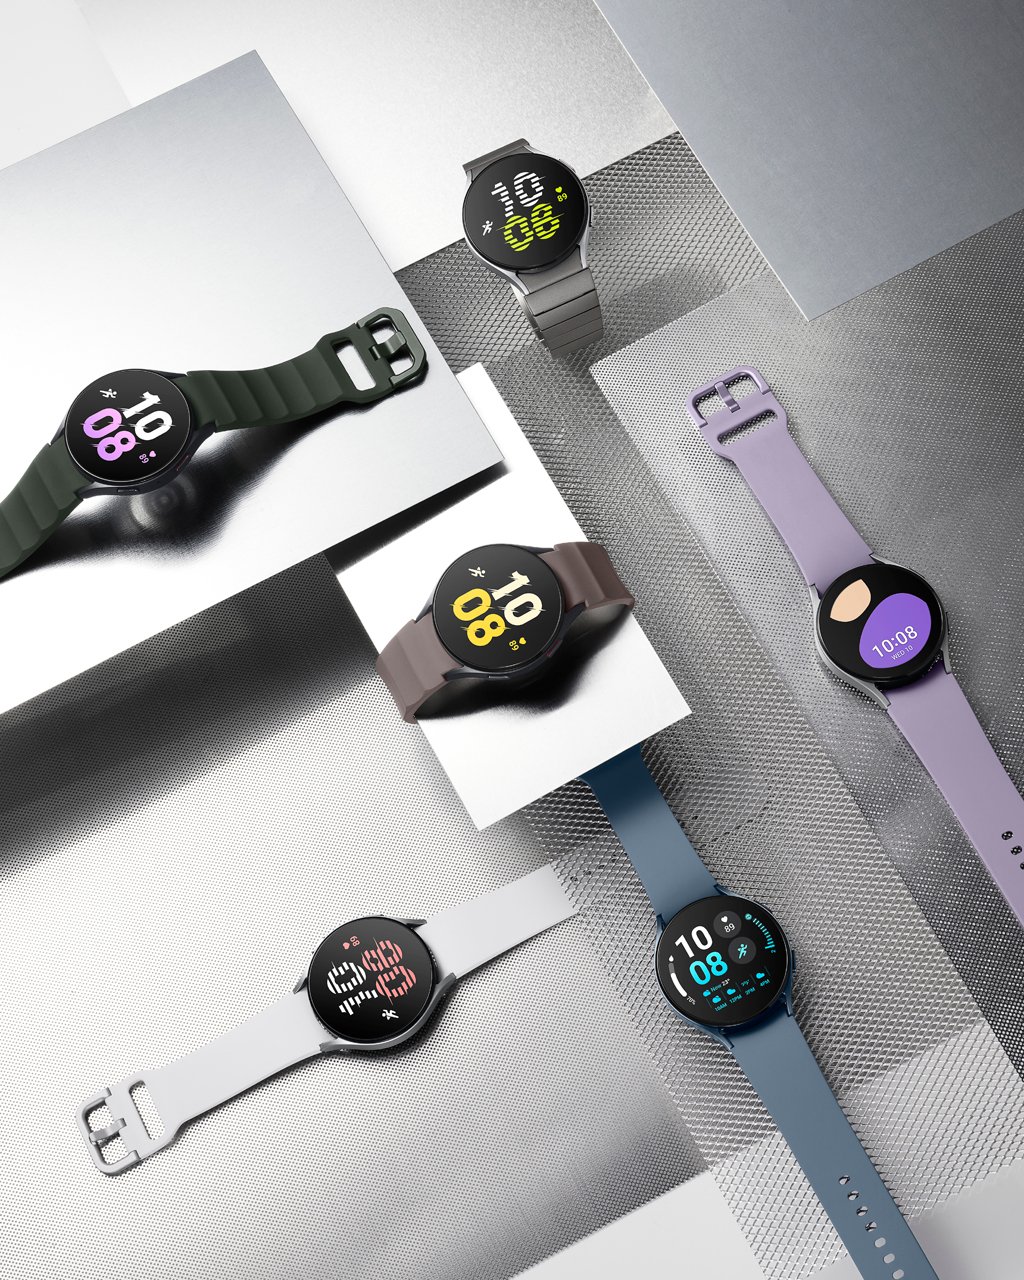 Samsung Galaxy Watch 4 Golf Edition launched: Specifications, price